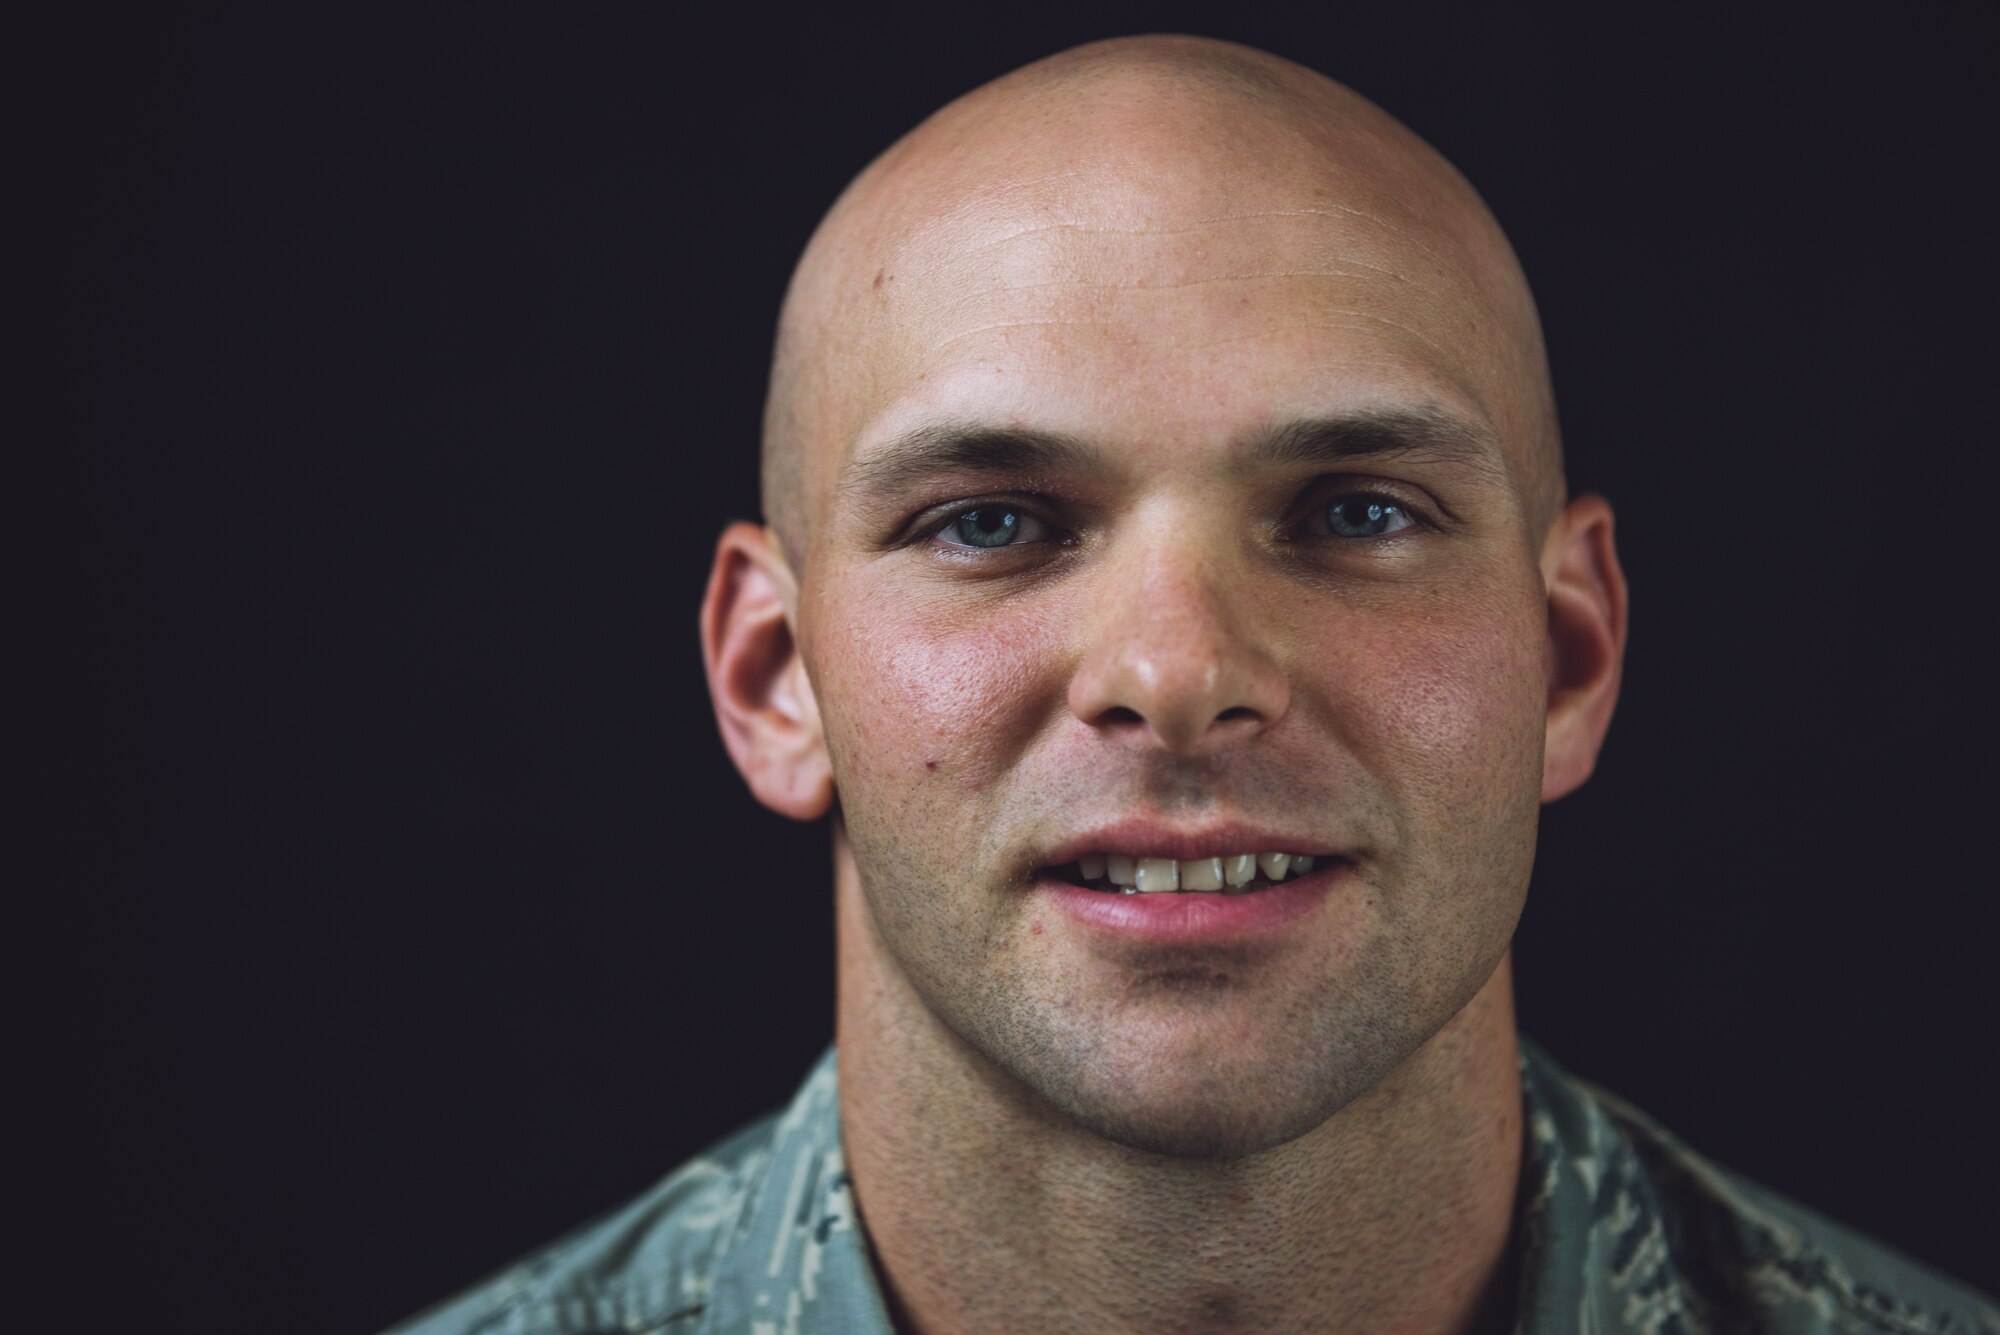 Airman 1st Class Adam Schuck, a services specialist with the 193rd Special Operations Force Support Squadron, Pennsylvania Air National Guard, shares some of his insight